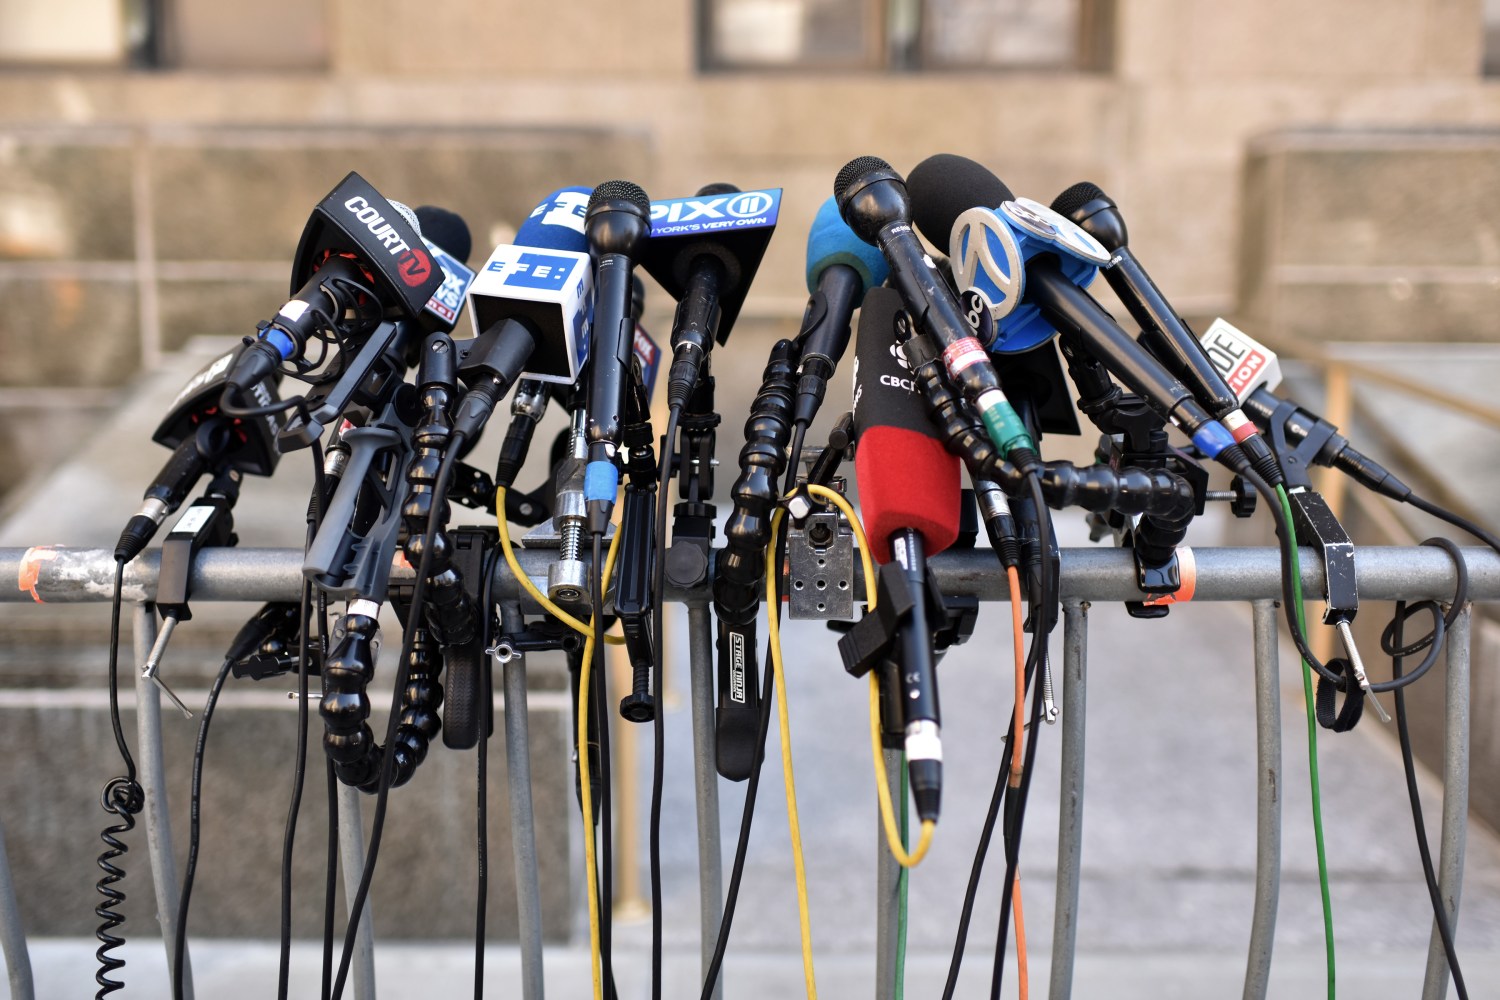 Microphones at the ready as members of the press wait outside the courts as jury deliberates for a second day in the Harvey Weinstein rape trial case at New York City Criminal Court, New York, February 19, 2020. (Anthony Behar/Sipa USA)No Use UK. No Use Germany.